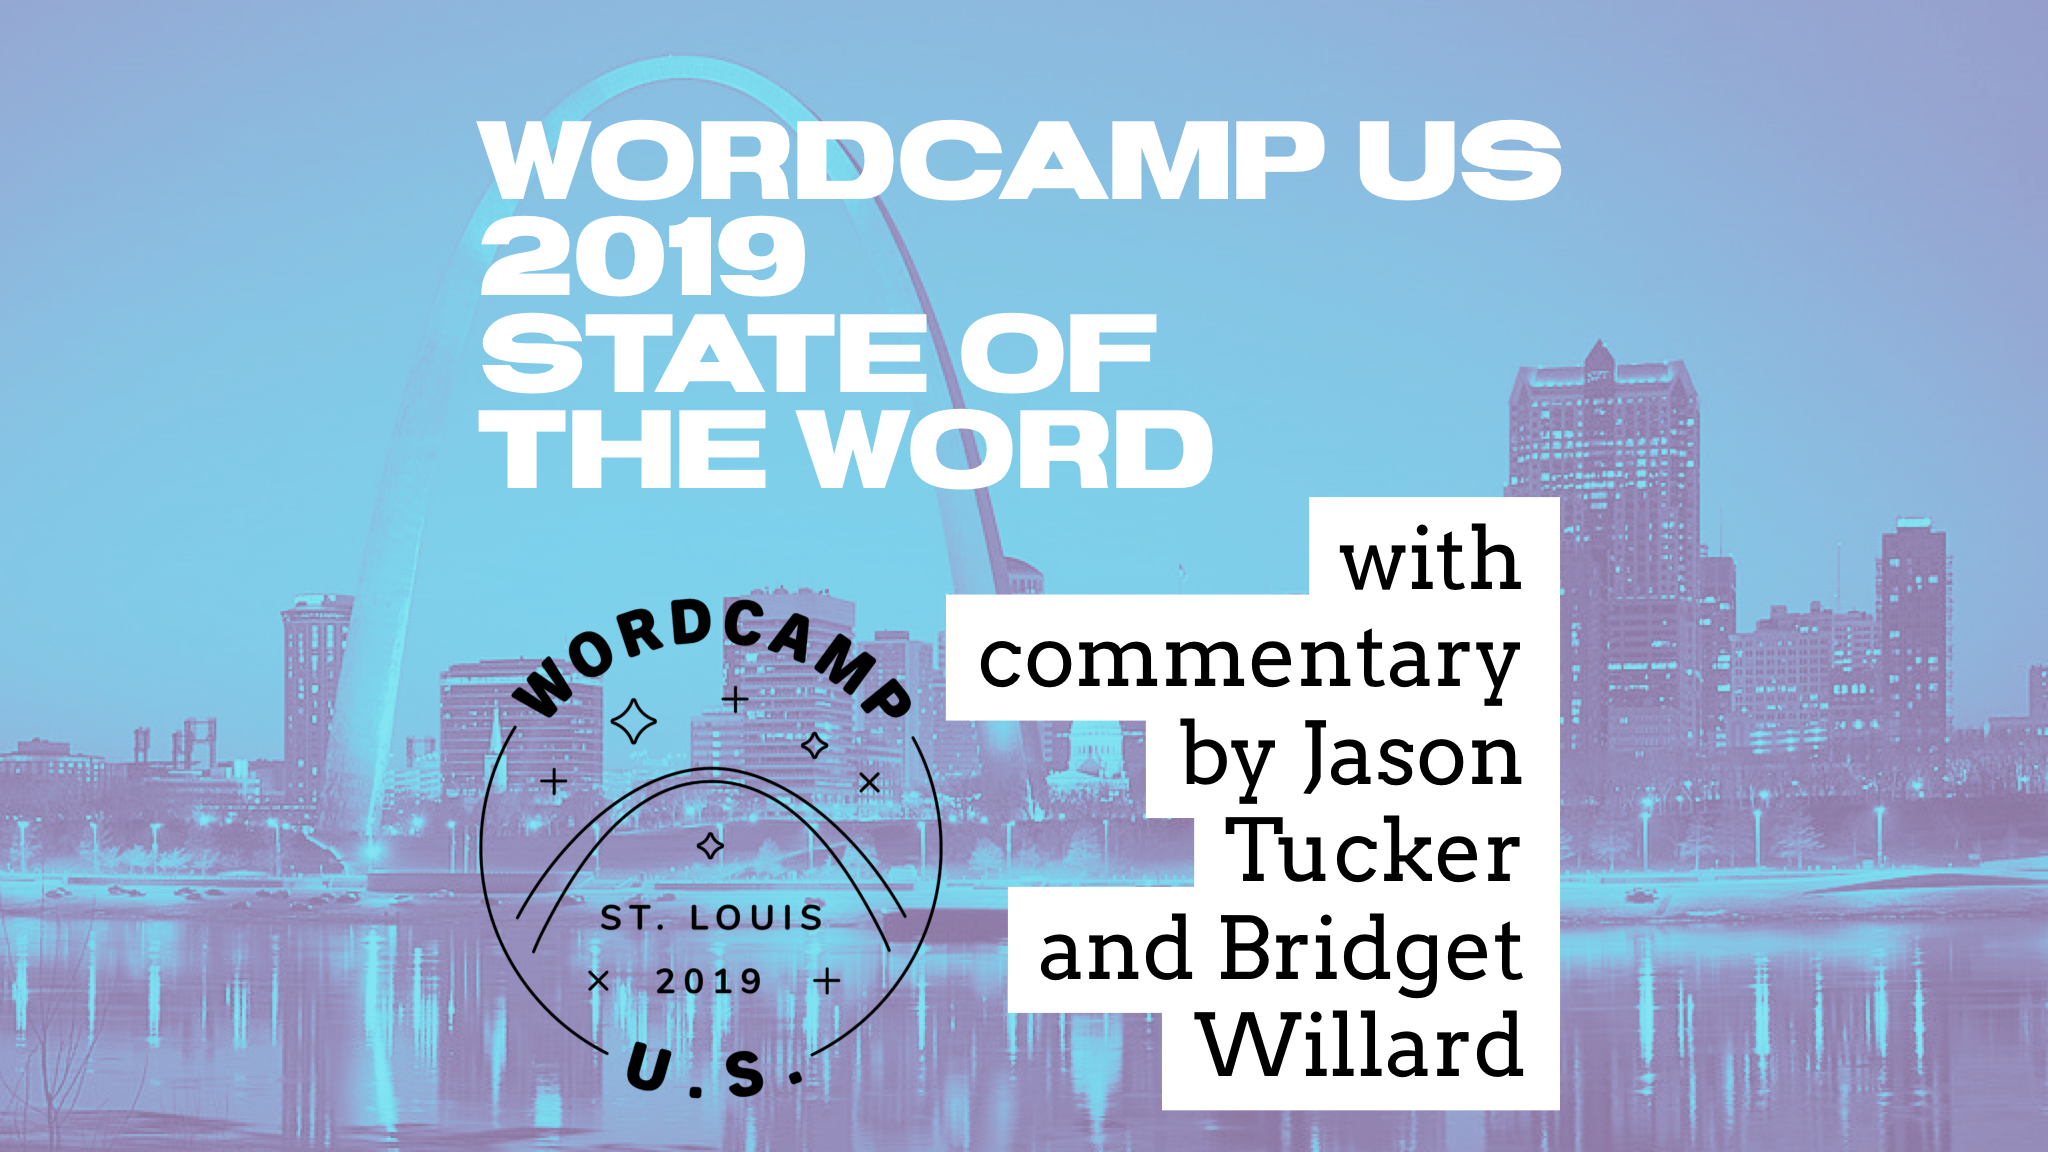 WPblab - State of the Word 2019 with commentary by Jason Tucker and Bridget Willard